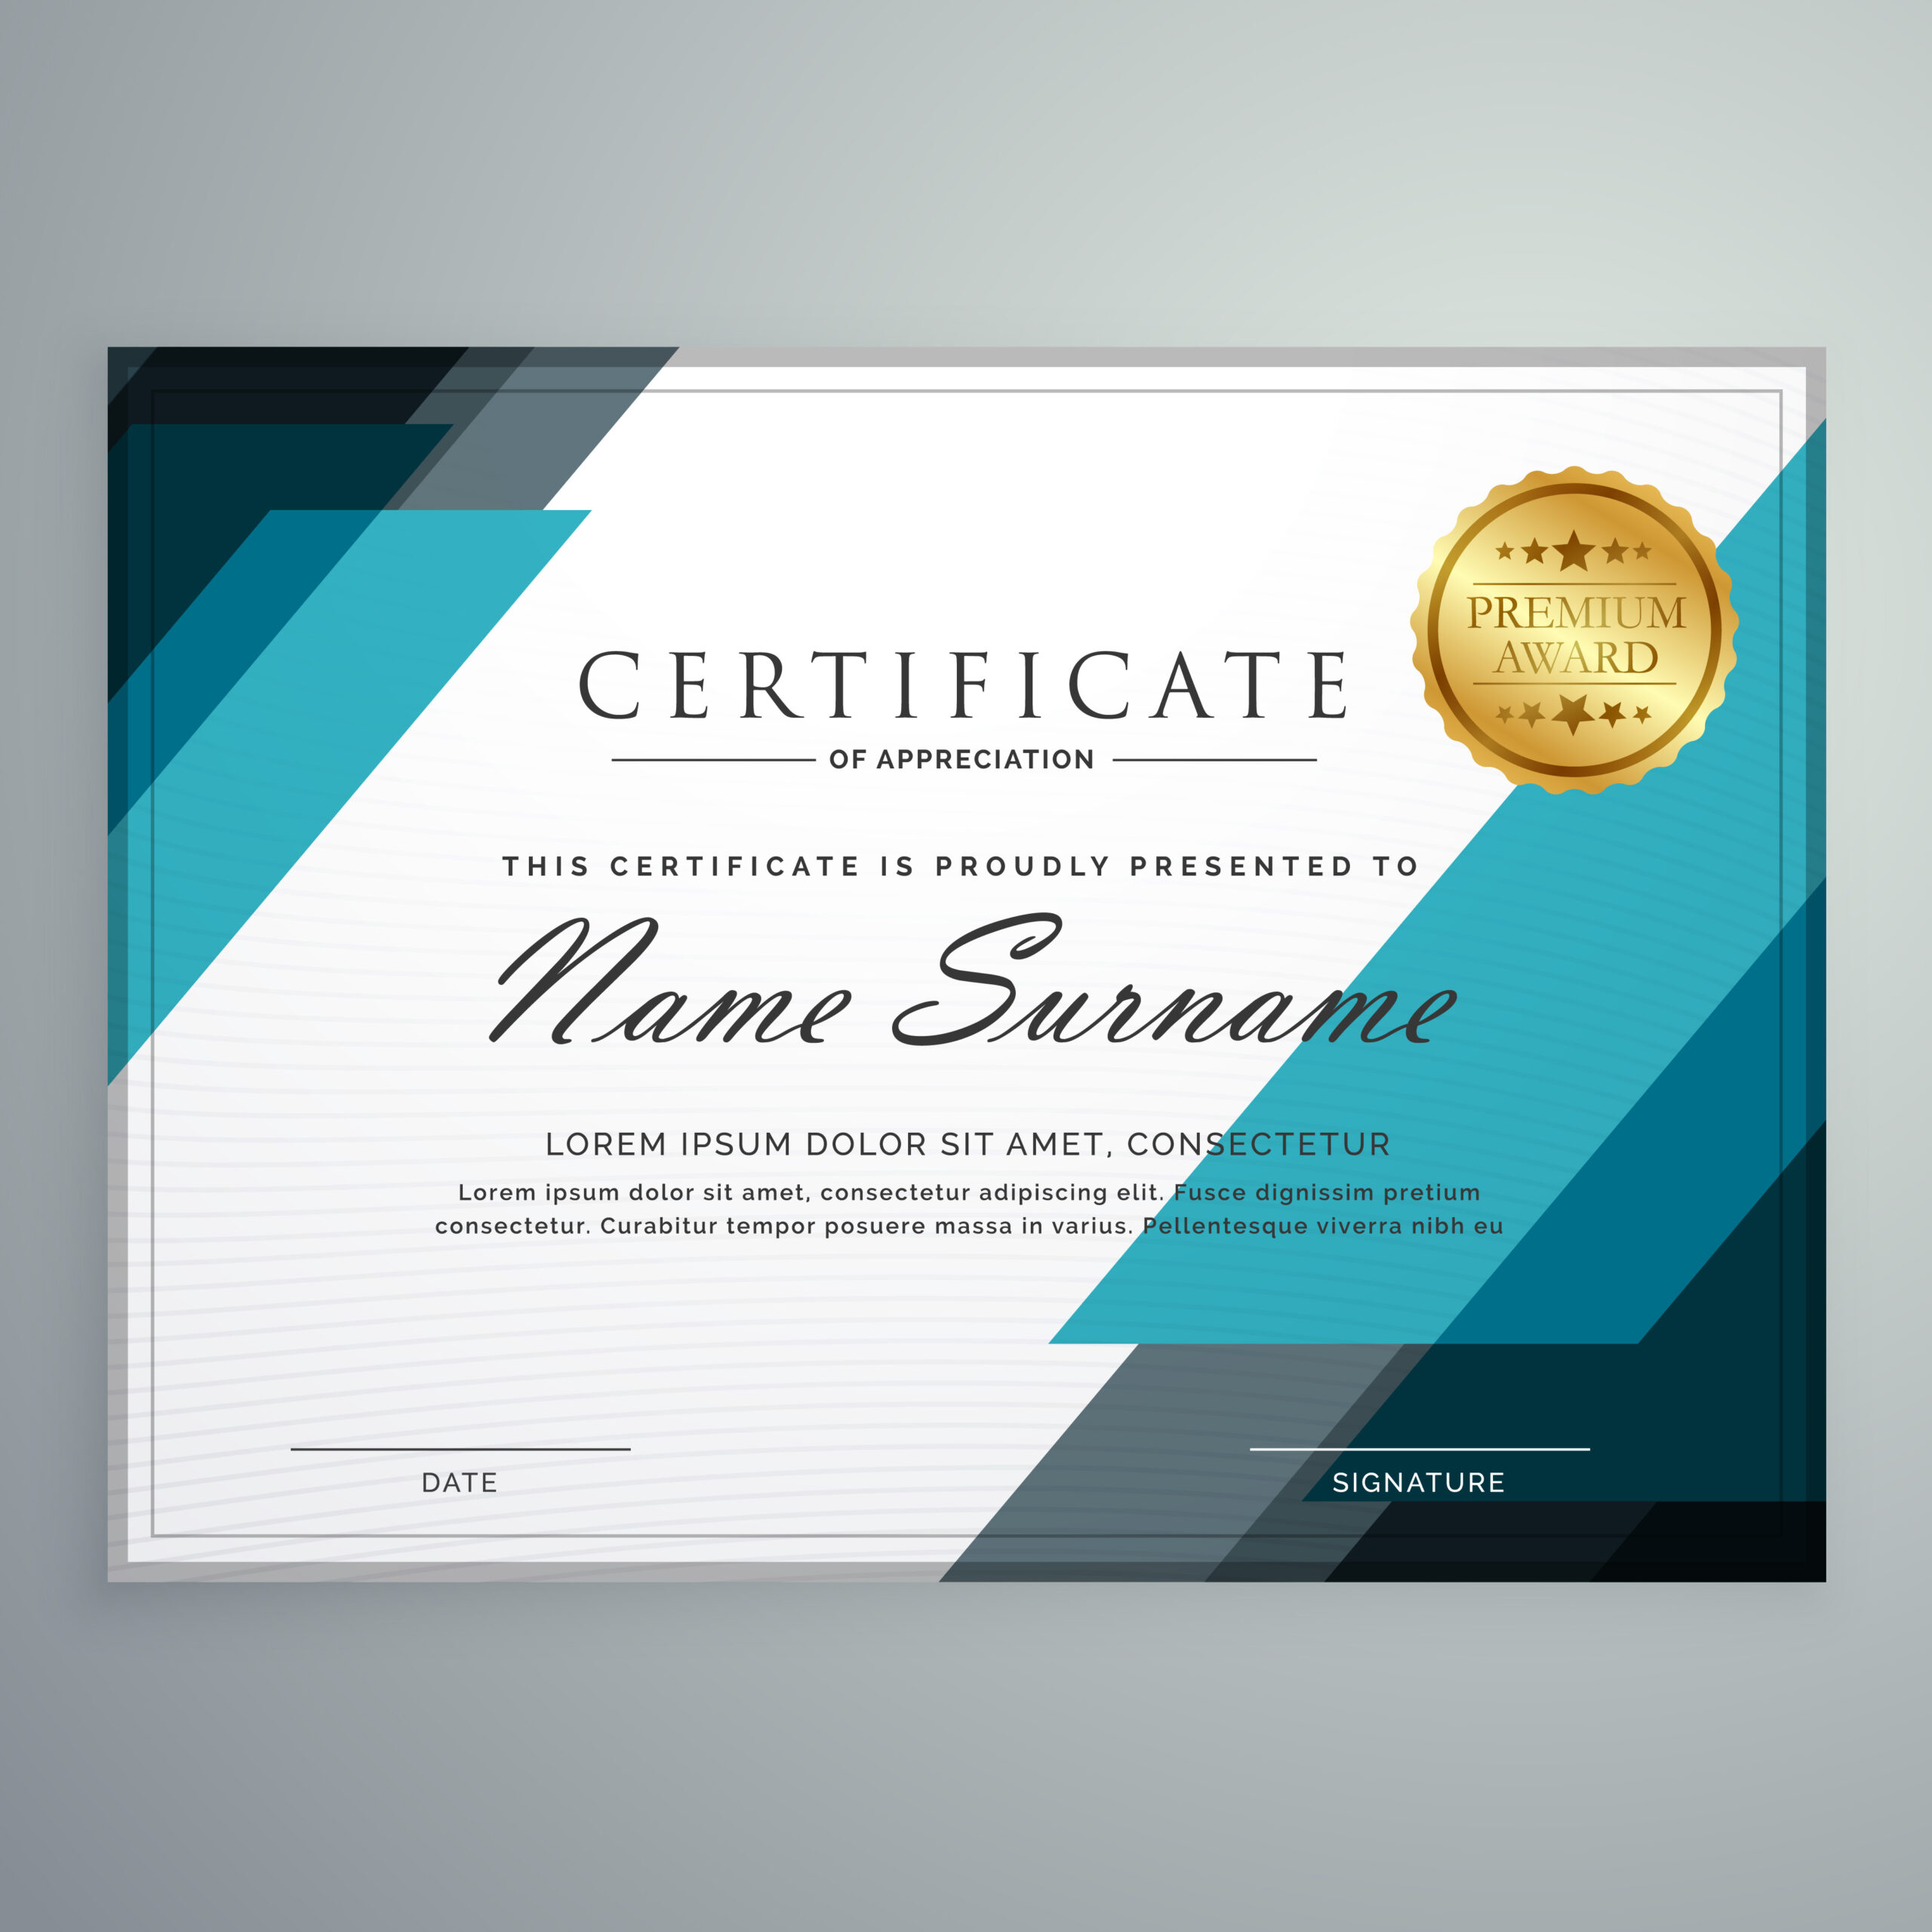 Stylish Certificate Of Appreciation Award Design Template With G regarding Awesome Award Certificate Design Template